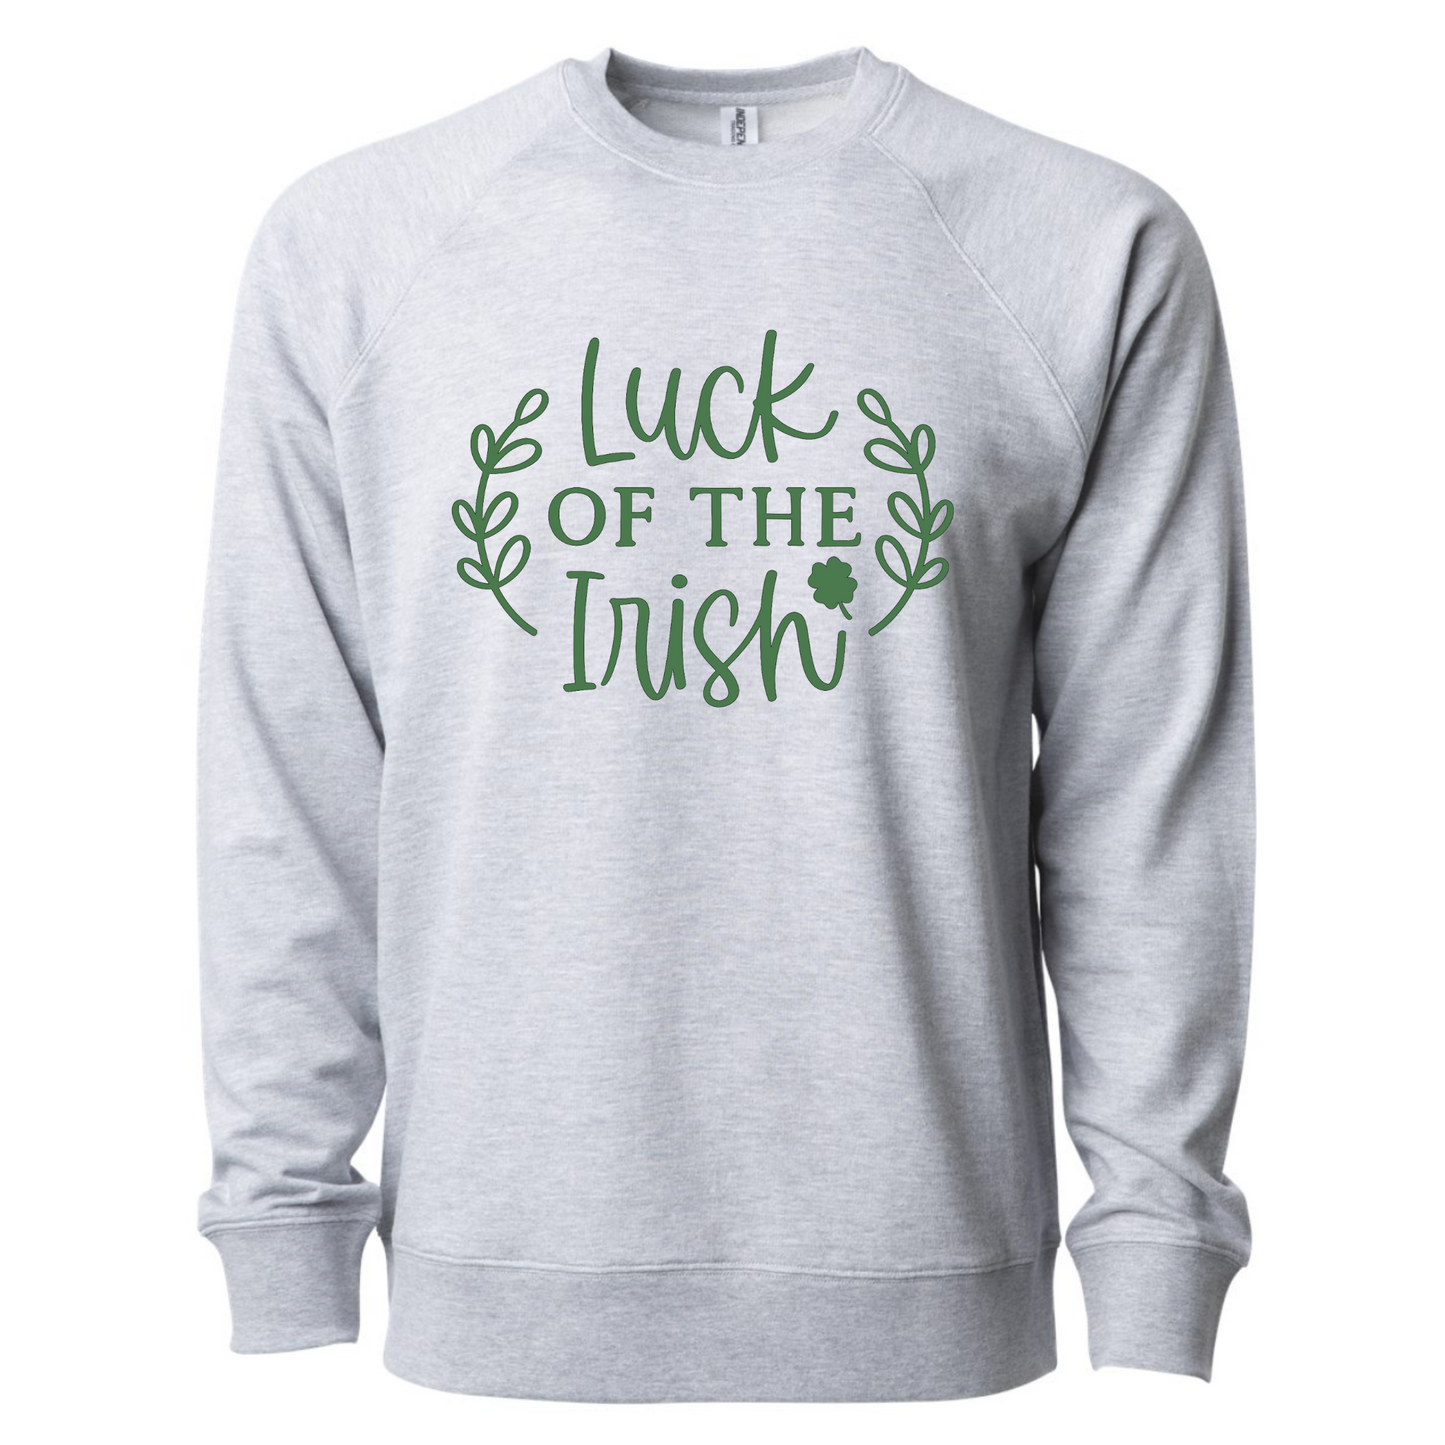 Luck Of The Irish - Pull Over Sweatshirt in a heather light gray. Luck Of The Irish quote on the sweatshirt is a medium green with cute leaves enclosing the design and a small four leaf clover. This is the front view of the sweatshirt.